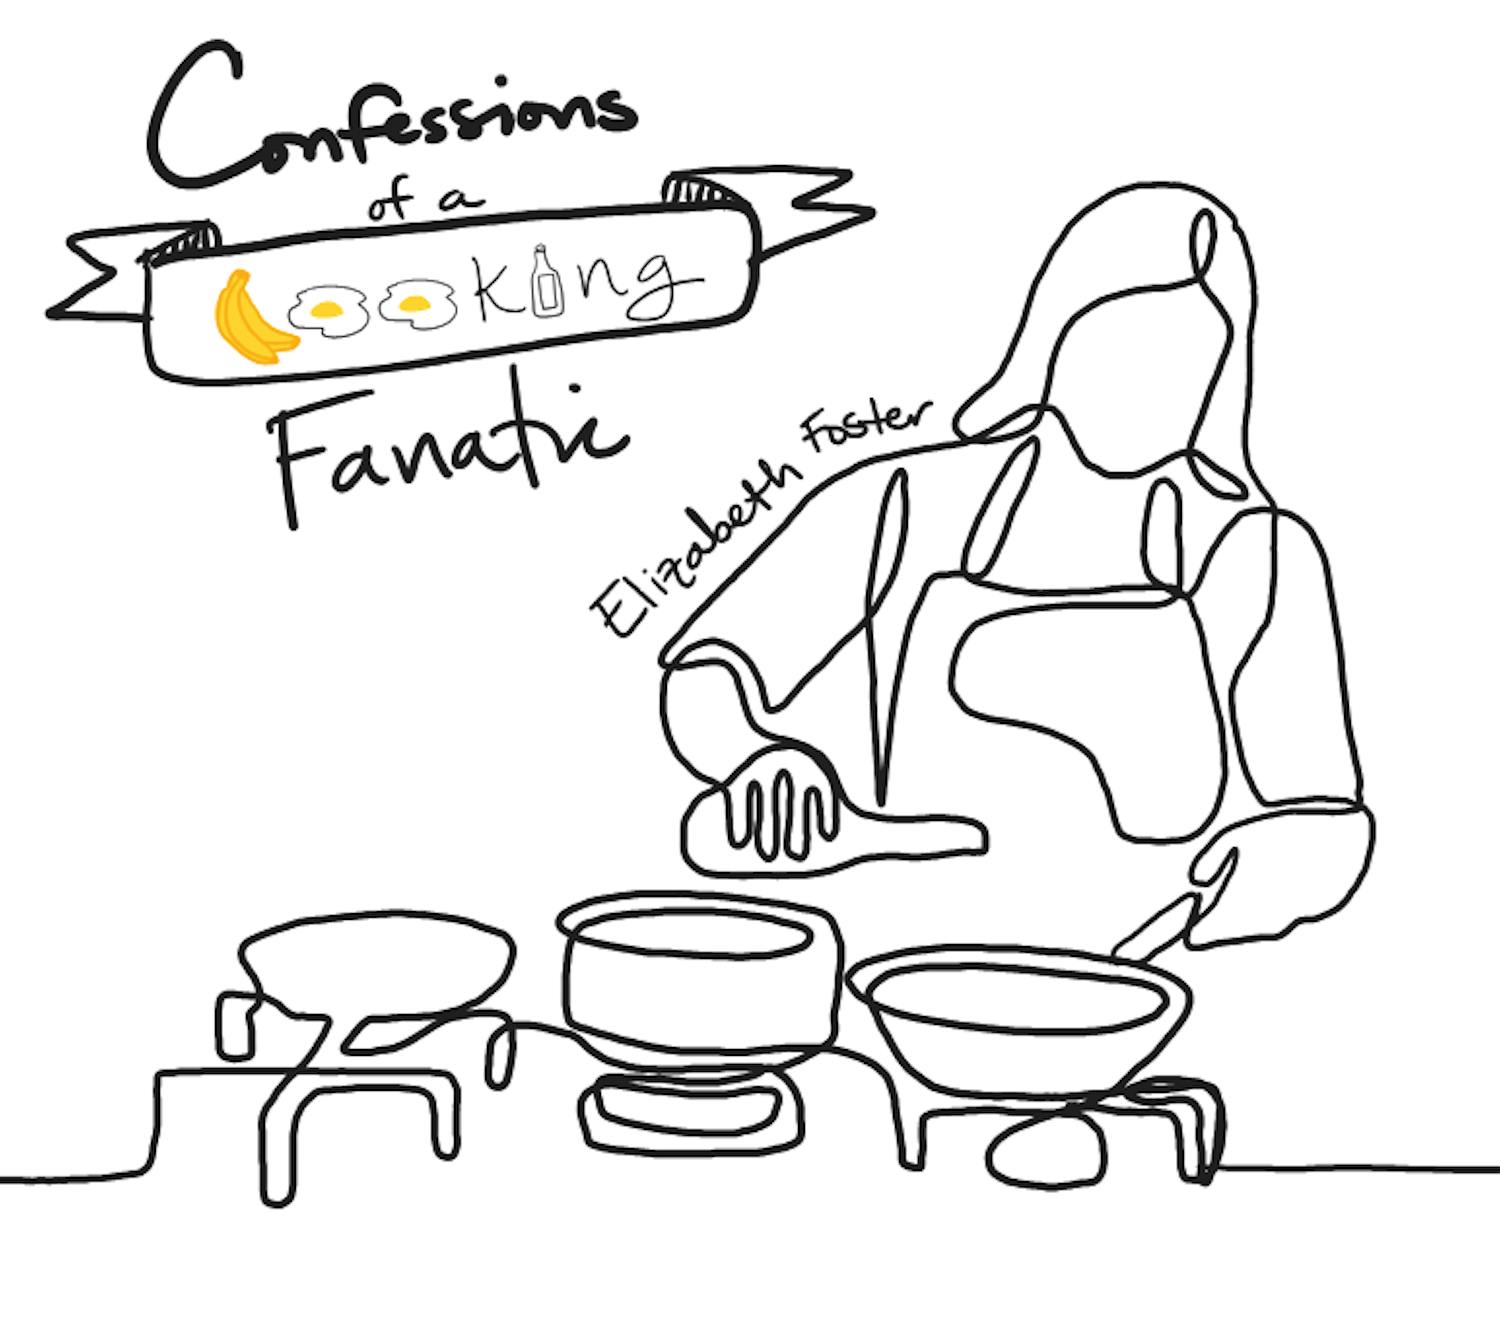 Confessions of a Cooking Fanatic